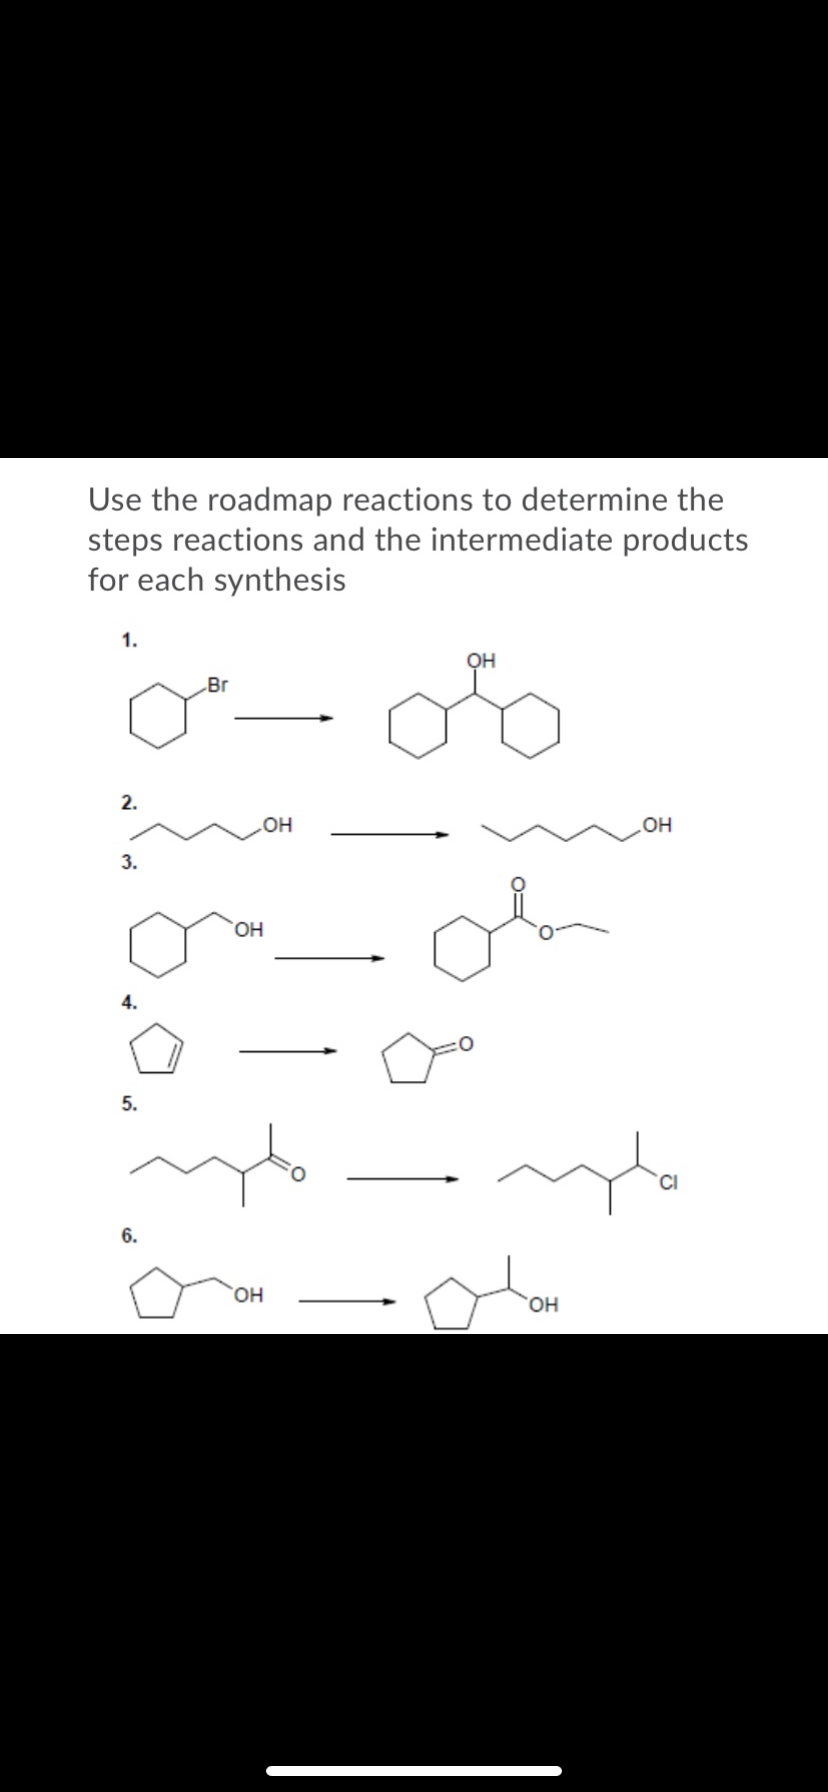 Use the roadmap reactions to determine the
steps reactions and the intermediate products
for each synthesis
1.
OH
Br
2.
HO
HO
3.
HO,
4.
5.
6.
HO,
HO
